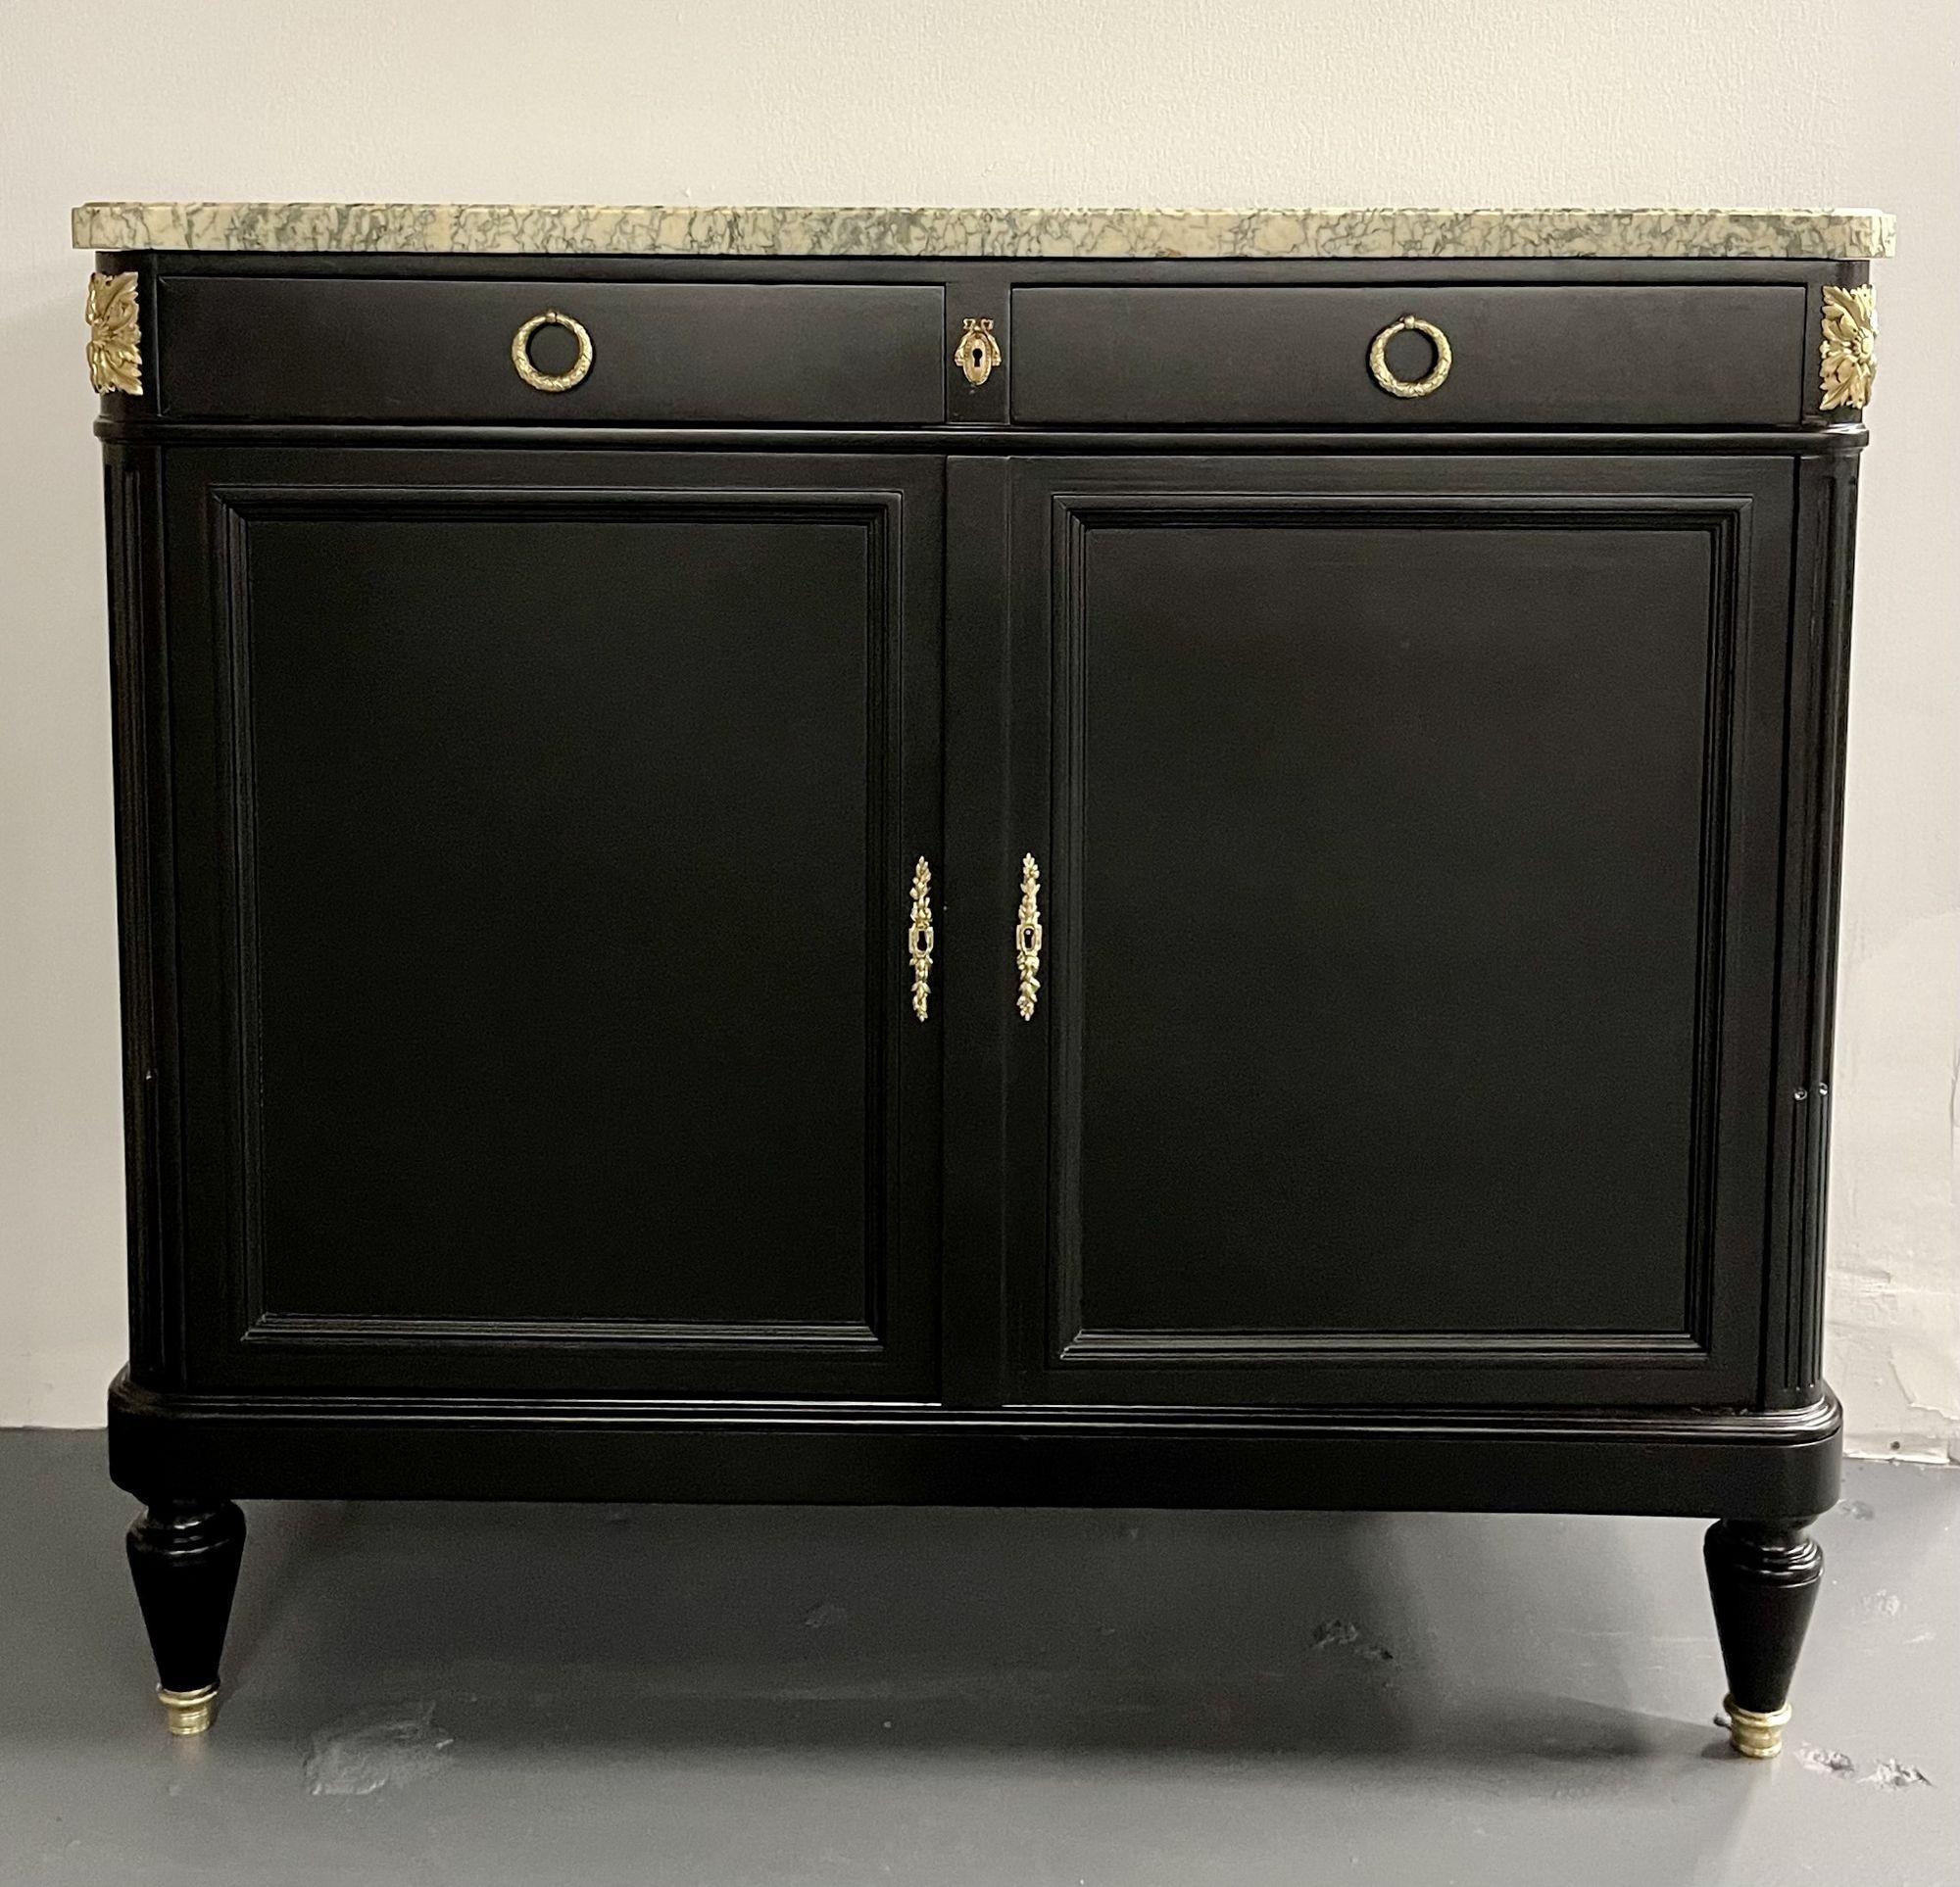 Hollywood Regency Style Commode, Chest, or High Board, Louis XVI, Bronze, French. 19th Century
Louis XVI commode fully refinished in a premium black satin finished with newly cleaned original exceptionally well cast Bronze mounts. This stunning